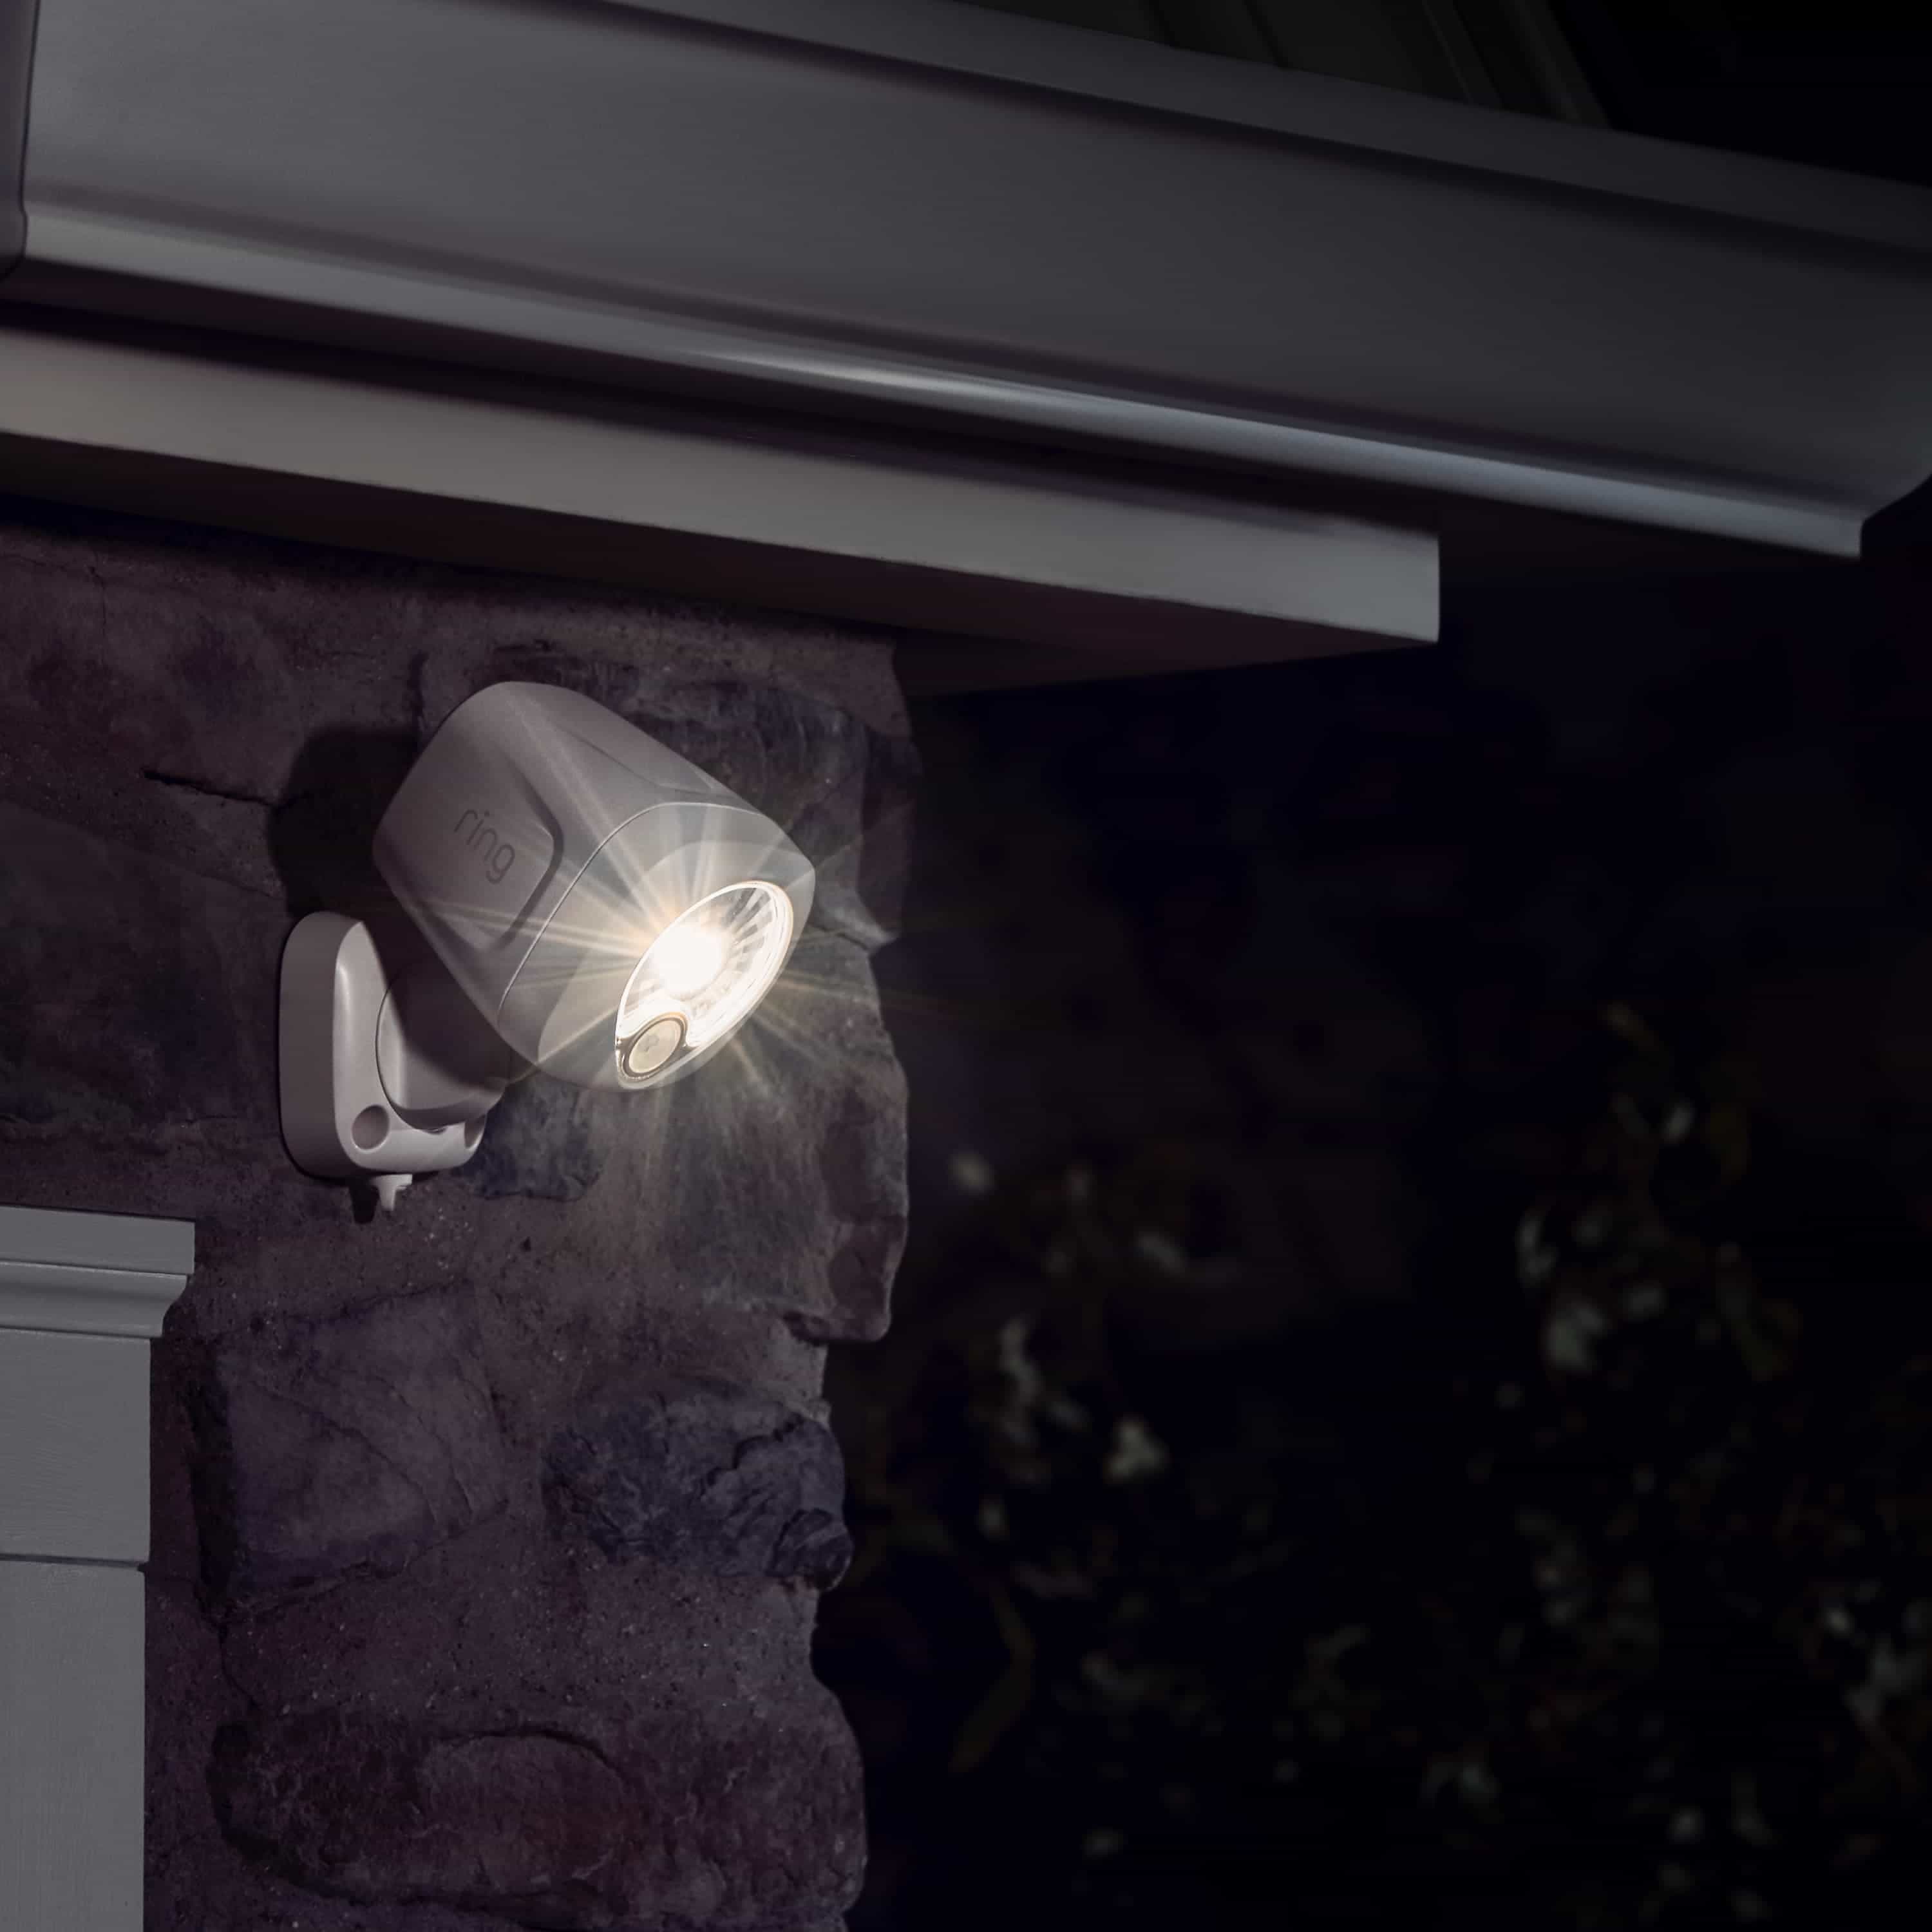 Smart Lighting Spotlight Battery - Outside at night, an illuminated Spotlight Battery is mounted to a rock wall near the corner of a home.